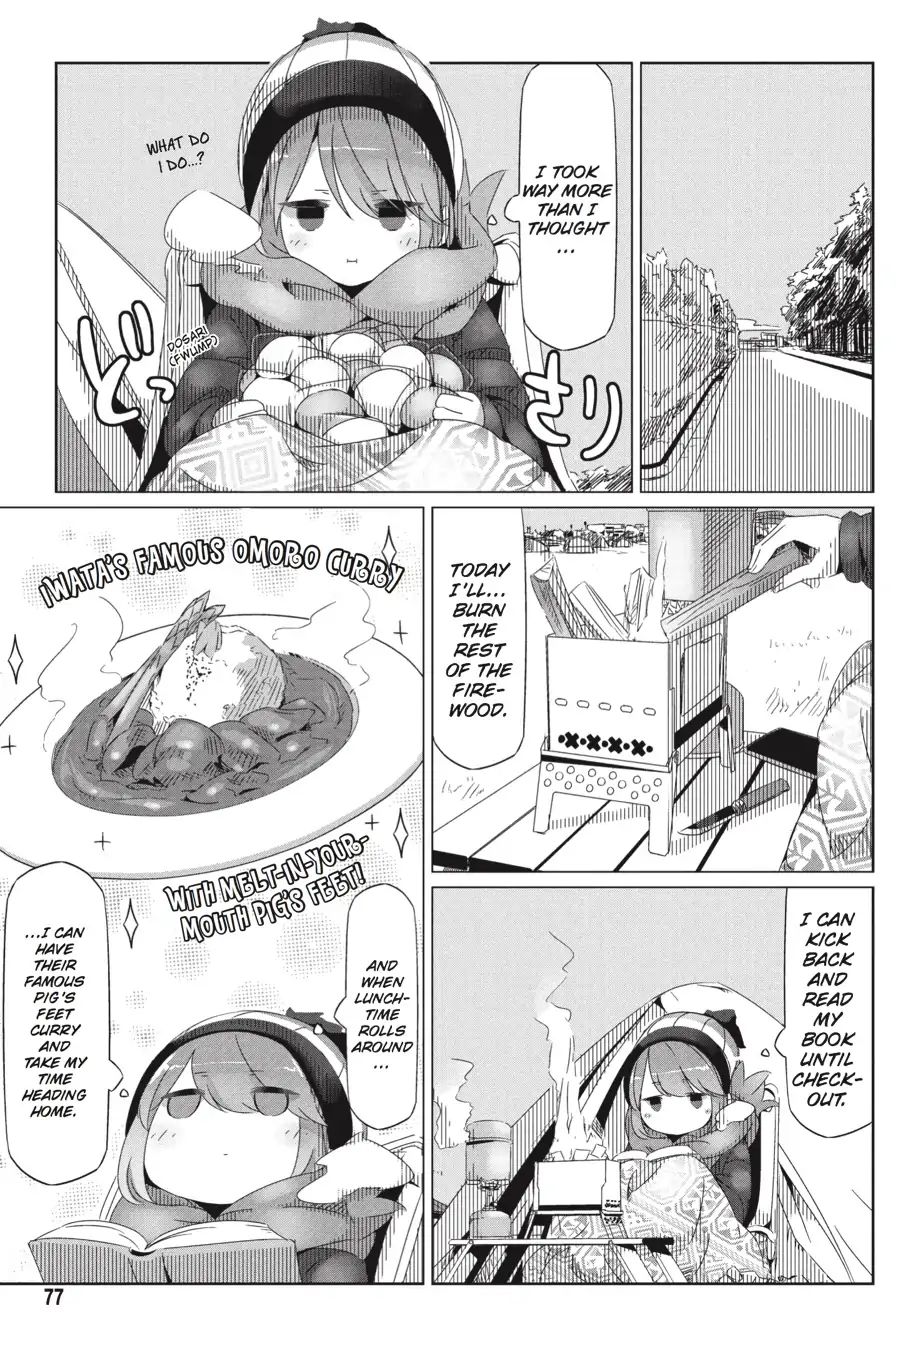 Yurucamp Vol.5 Chapter 26: The Beginning of the Year